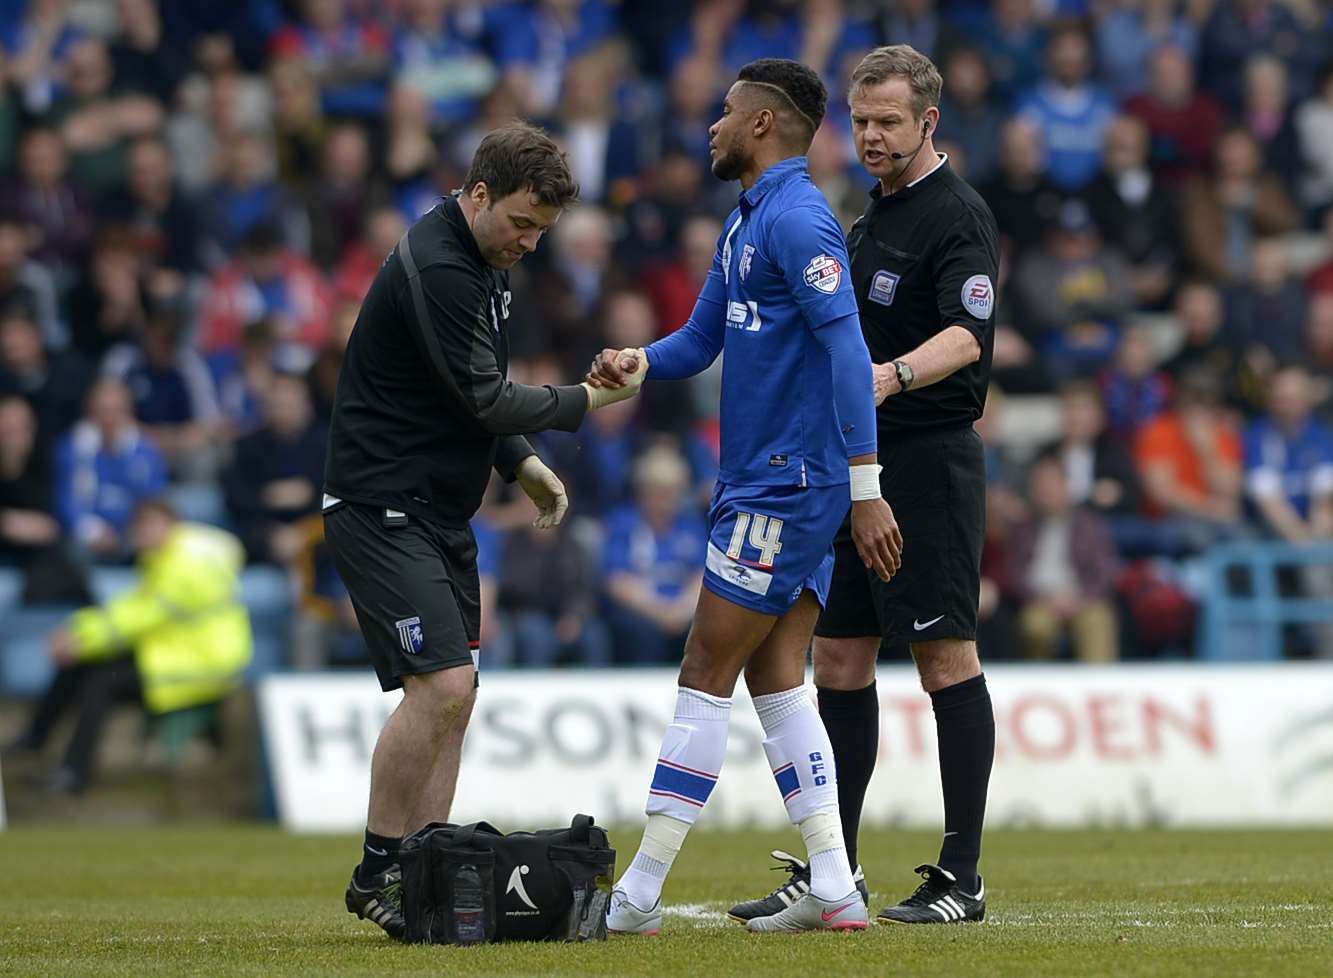 Dominic Samuel suffers a knee injury against Coventry Picture: Barry Goodwin